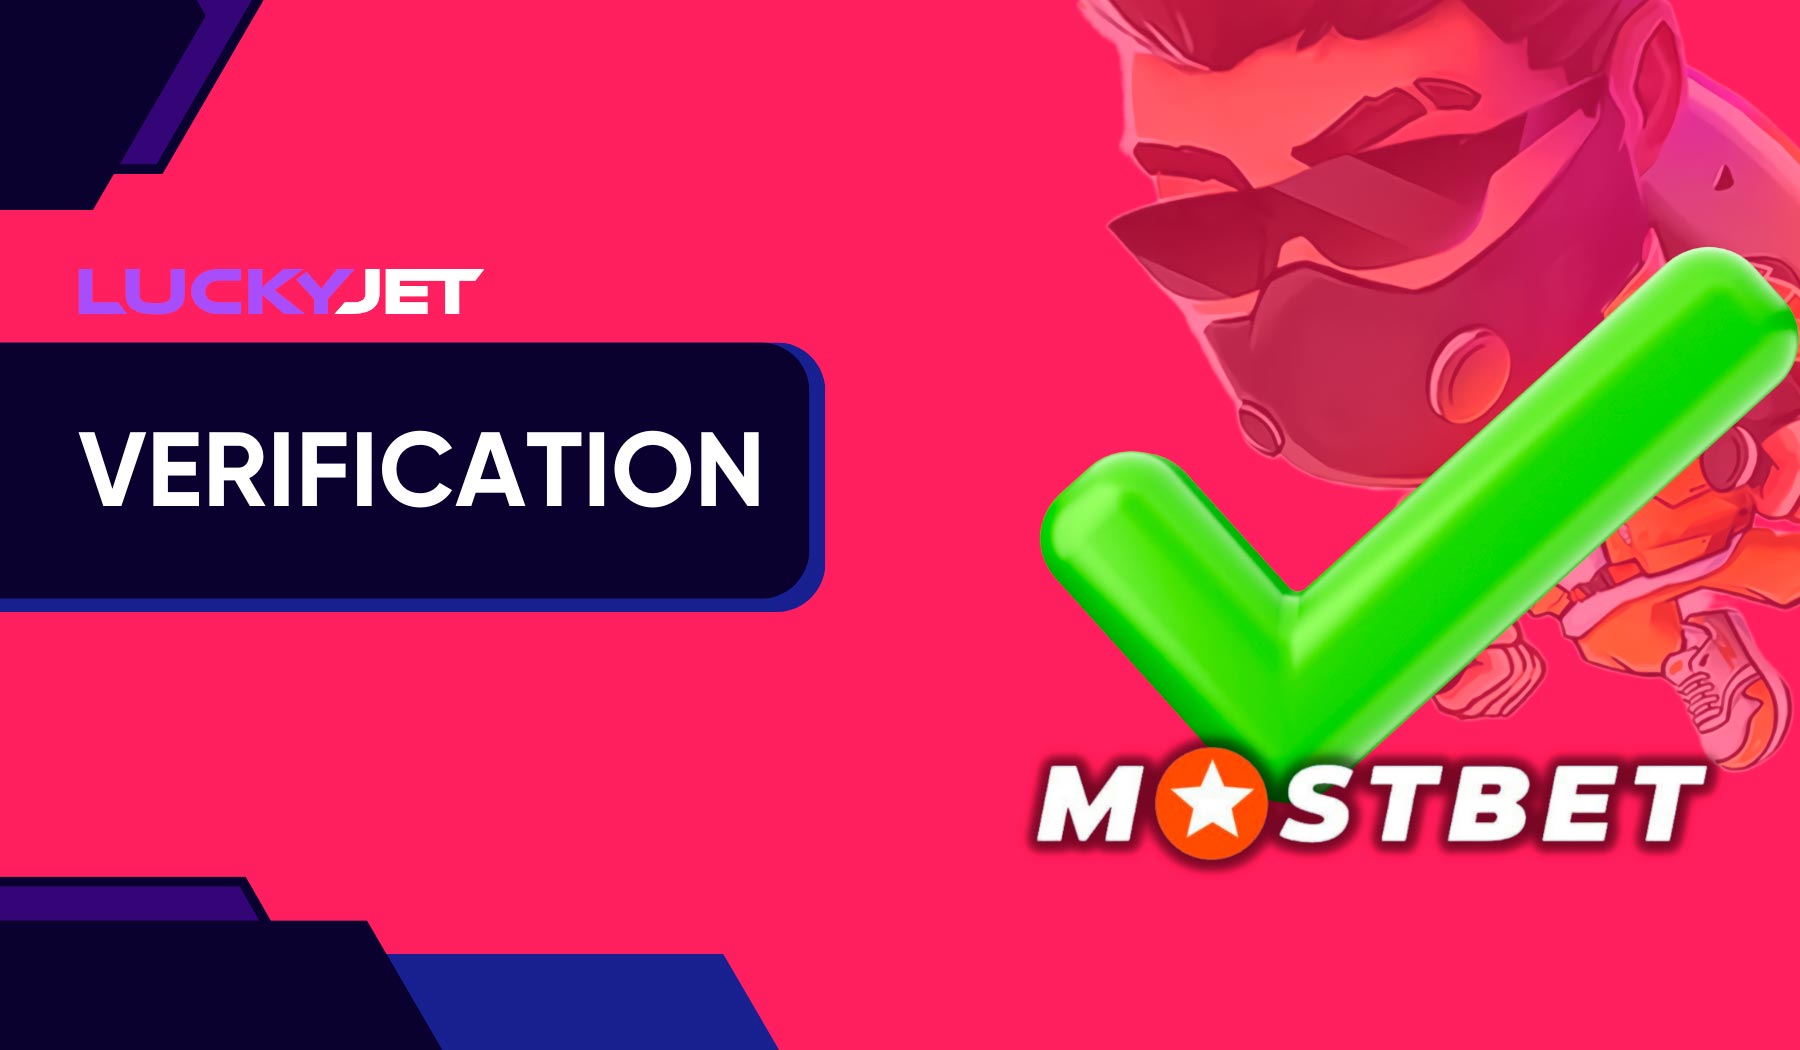 Verifying Your Account at Mostbet's Lucky Jet Crash Game